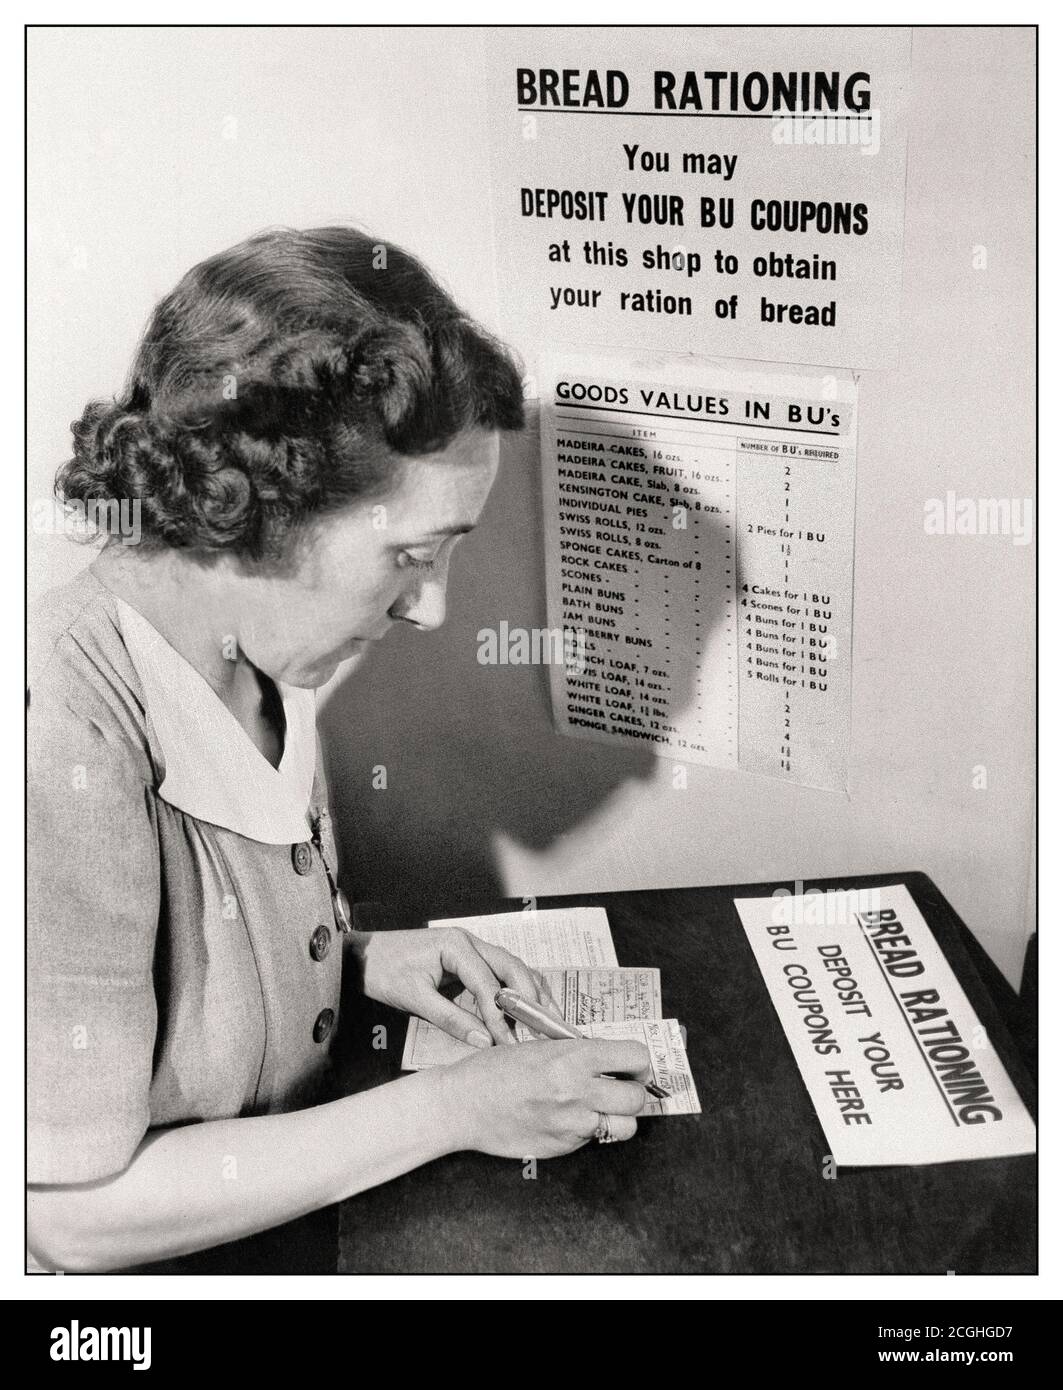 FOOD RATIONING 1940’s/ 50’s Post WW2 British UK Bread Rationing BU Coupons deposit point for ration rationing of bread goods Stock Photo